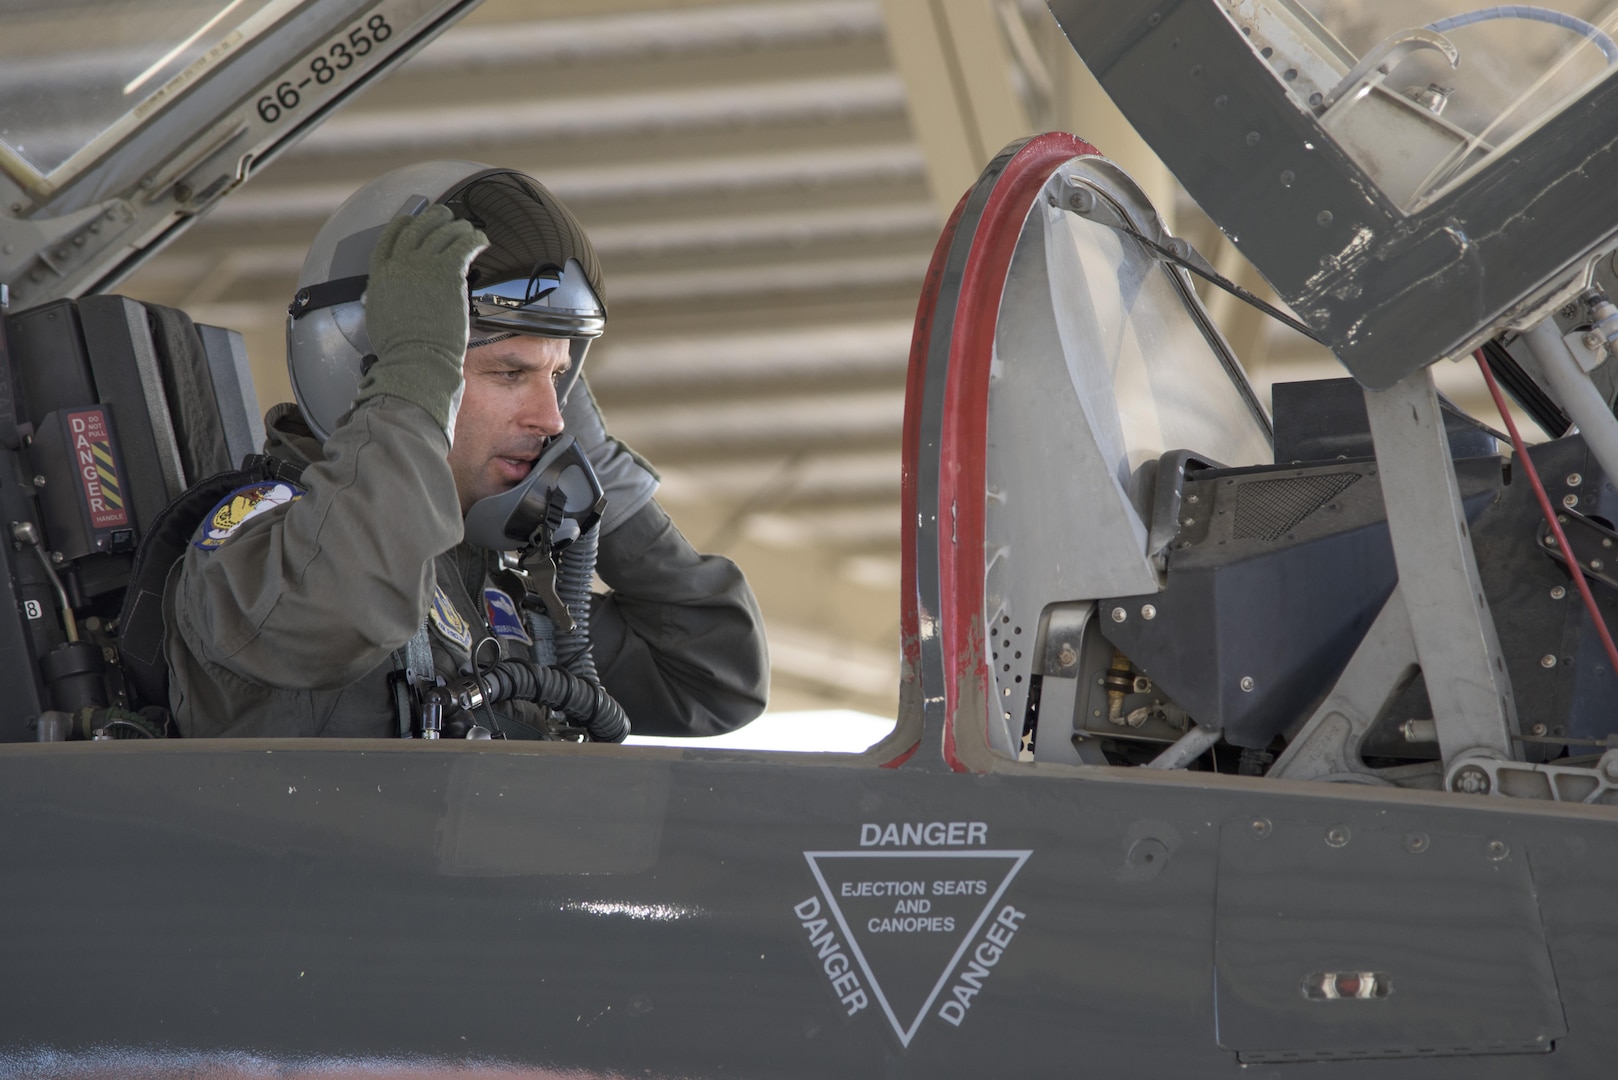 Lt. Col. Kyle Goldstein, 39th Flying Training Squadron commander, prepares to take off in a T-38 C Talon May 4, 2017, at Joint Base San Antonio-Randolph, Texas during the Cobras in the Clouds exercise. The exercise gave 39th FTS members a chance to practice their war-time mission of taking control of the training mission of the 12th Operations Group. (U.S. Air Force photo by Senior Airman Stormy Archer)